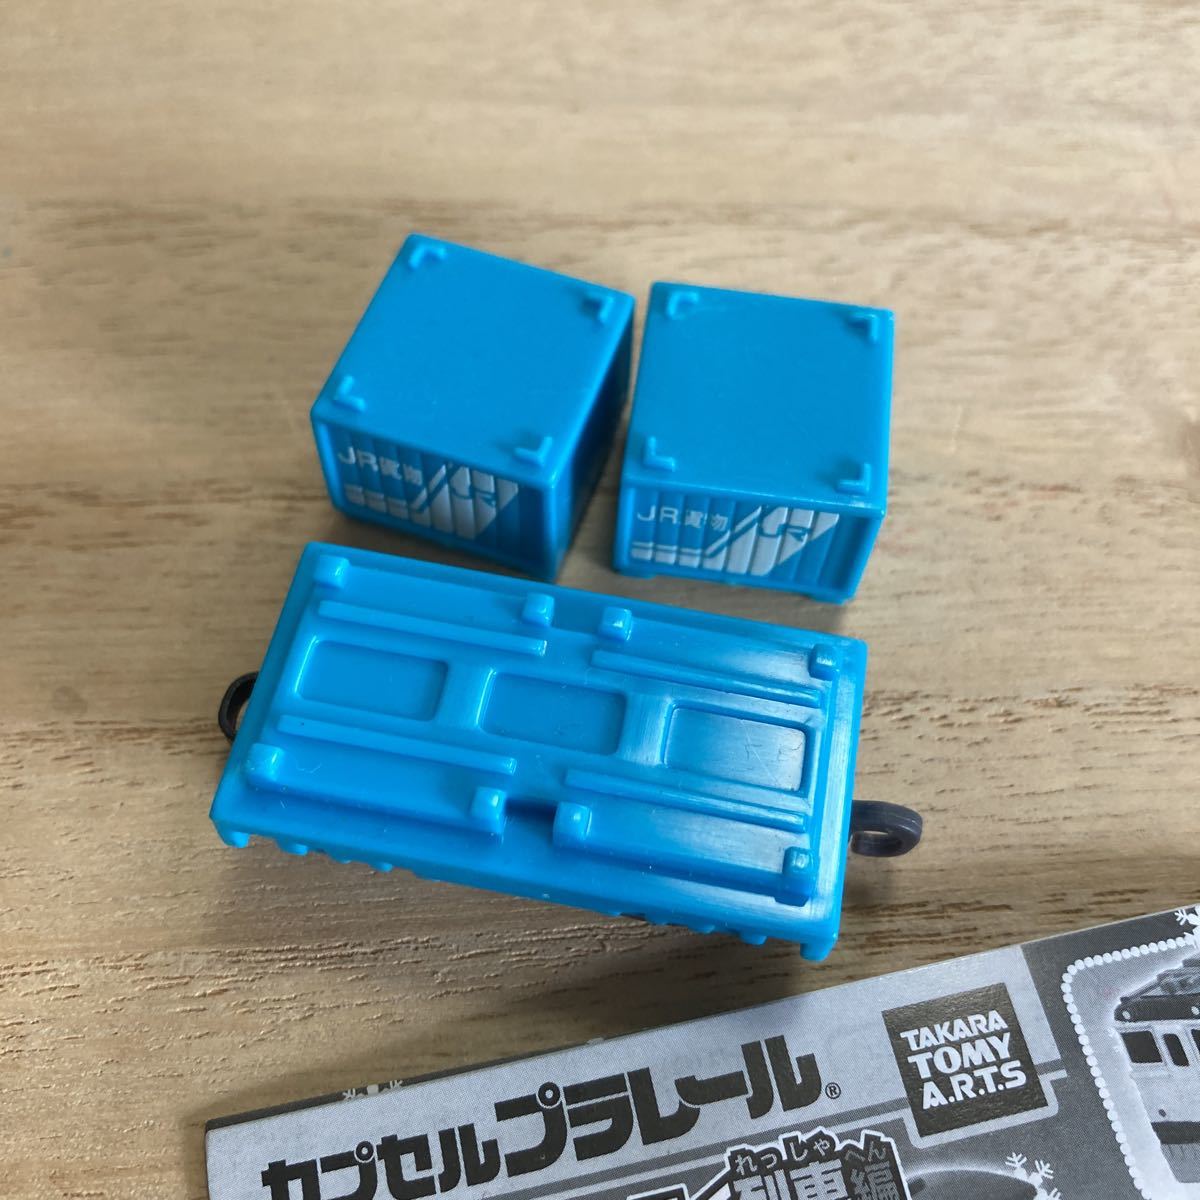  Capsule Plarail ....! is ... row car compilation container car A